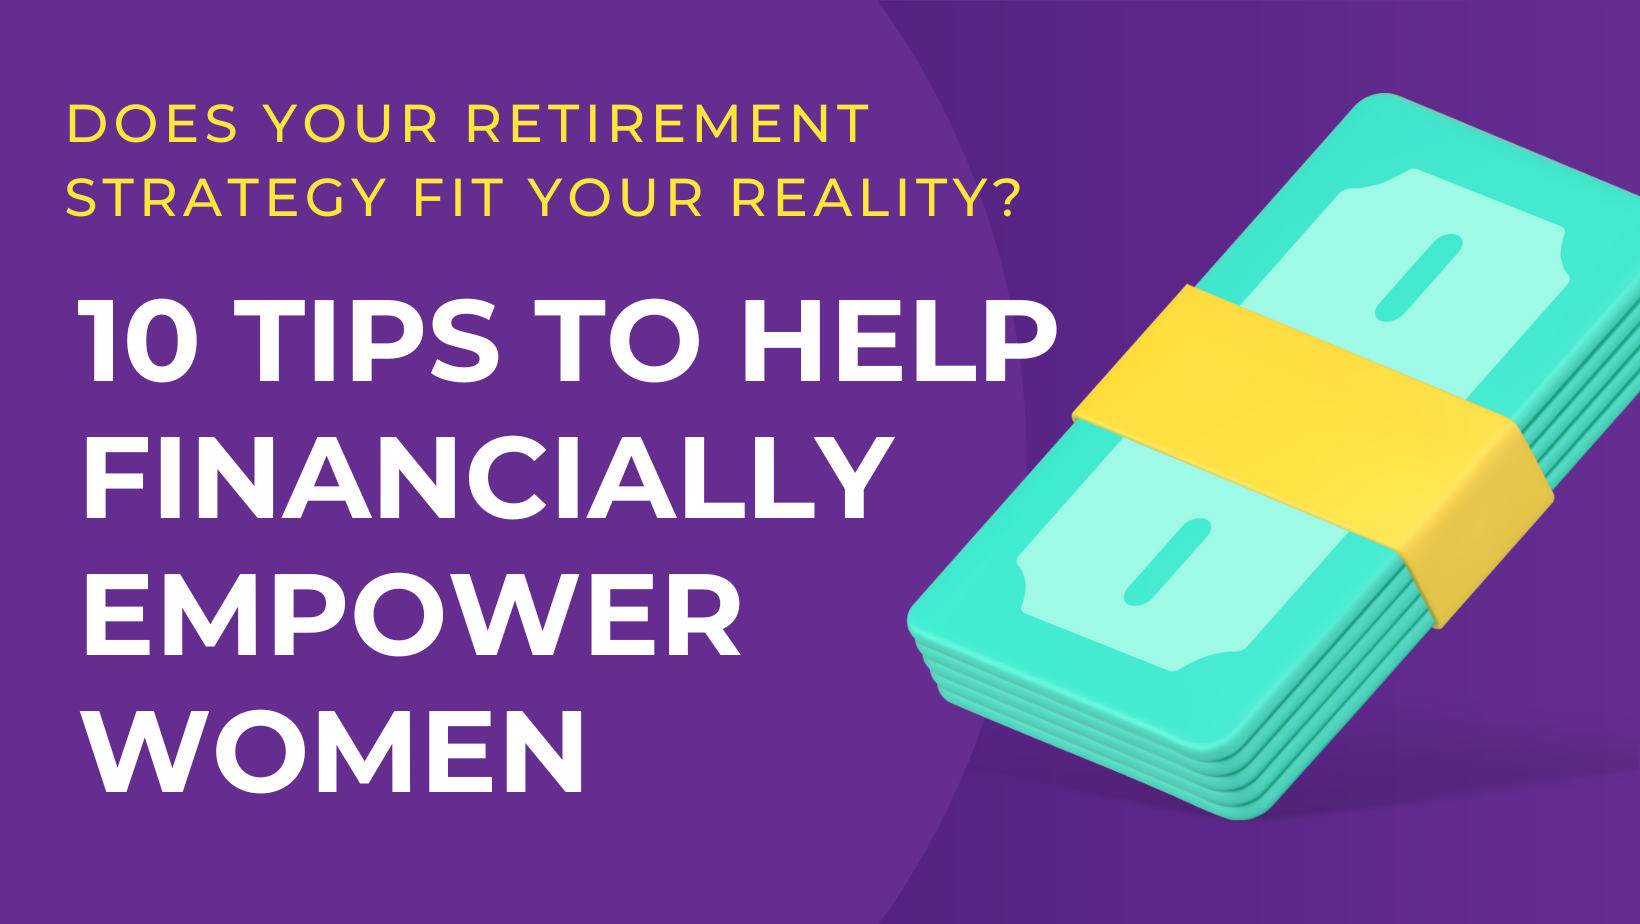 10 Tips to help financial empower women